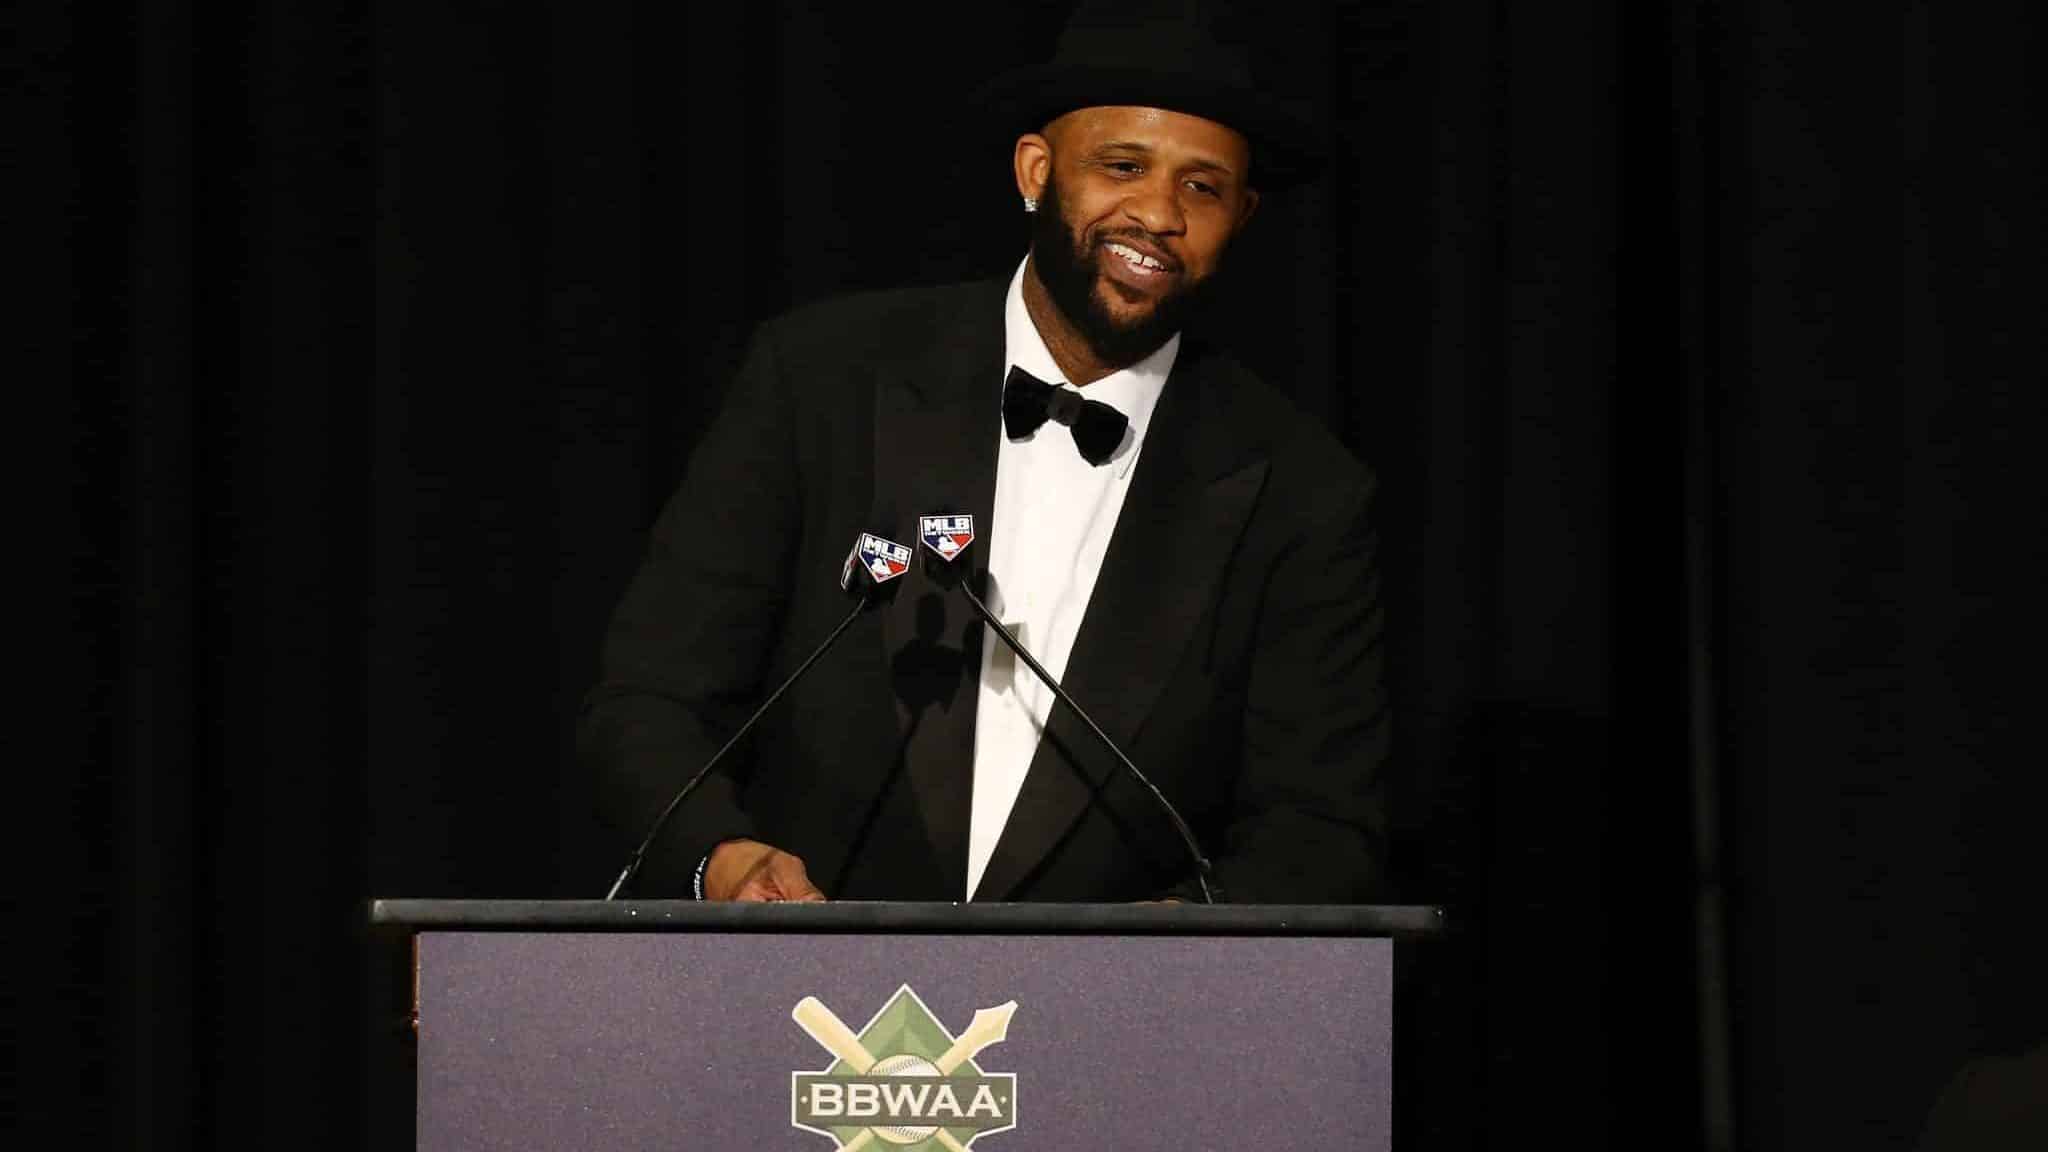 NEW YORK, NEW YORK - JANUARY 25: CC Sabathia of the New York Yankees speaks after receiving the William J. Slocum-Jack Lang Award for Long and Meritorious Service during the 97th annual New York Baseball Writers' Dinner on January 25, 2020 Sheraton New York in New York City.